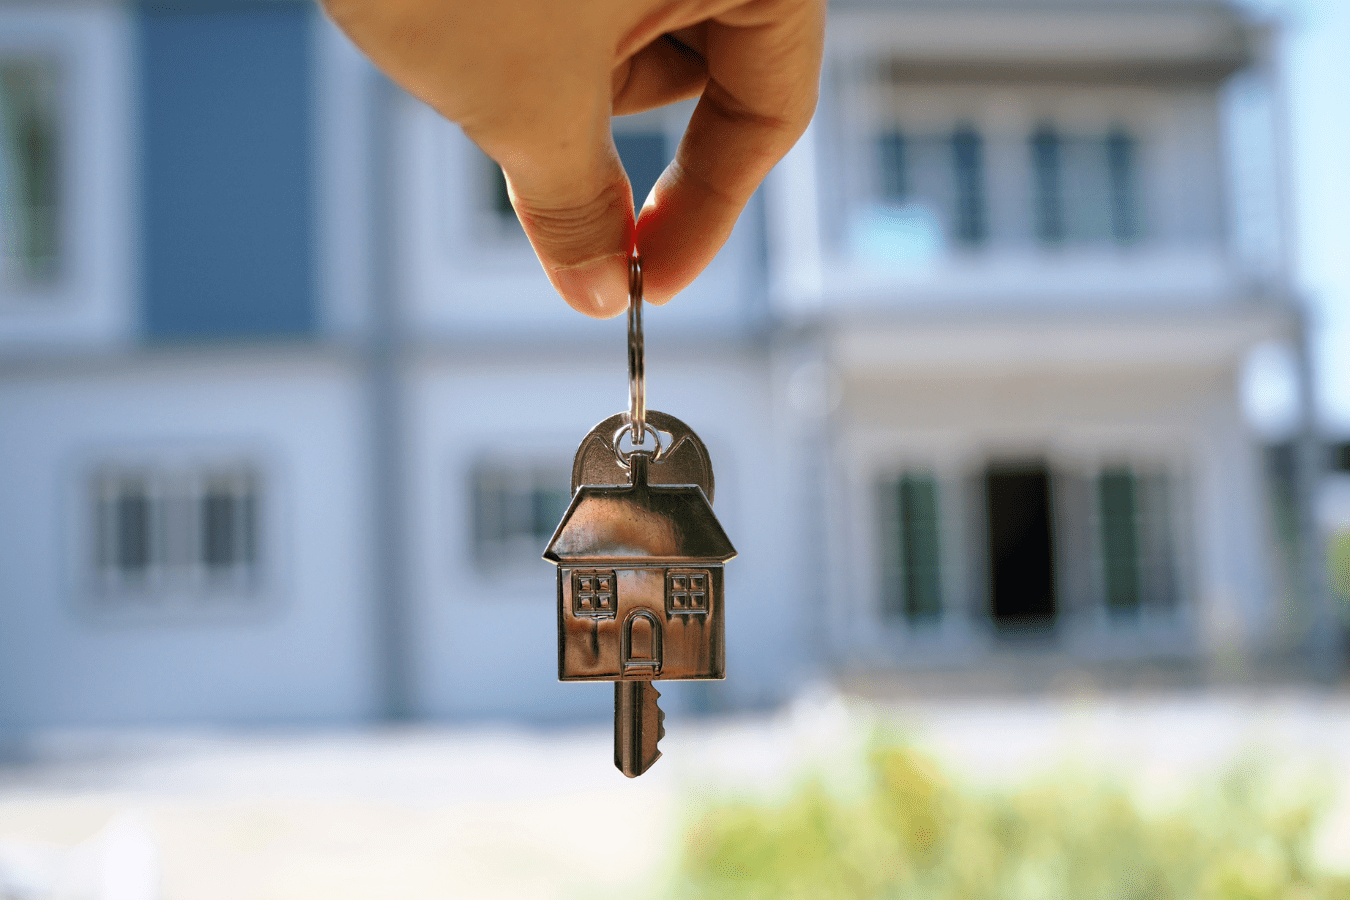 Dream of Buying a House: What Does it Mean?